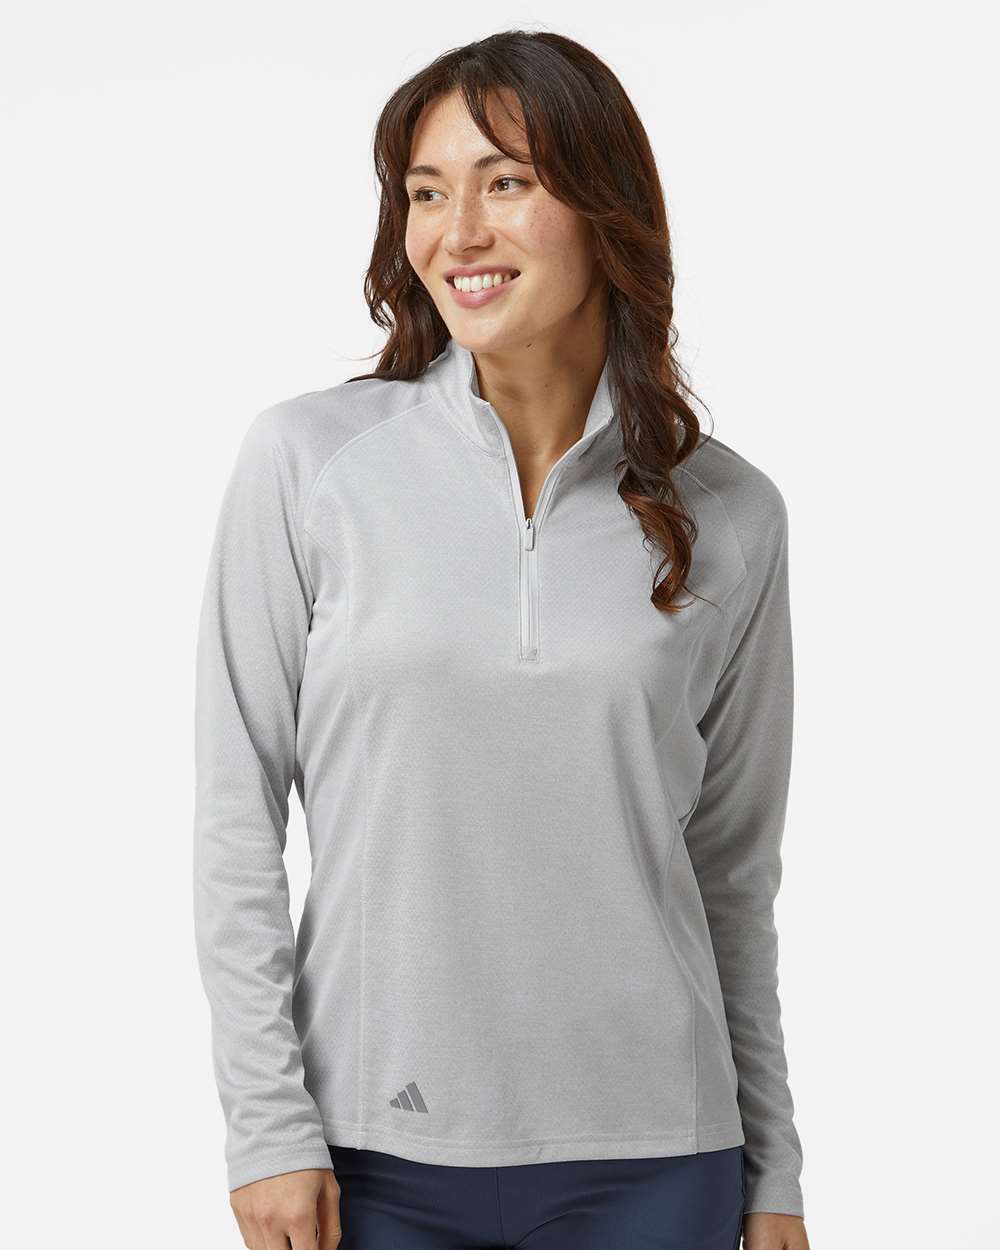 Adidas A594 Women's Space Dyed Quarter-Zip Pullover #colormdl_Grey One Heather